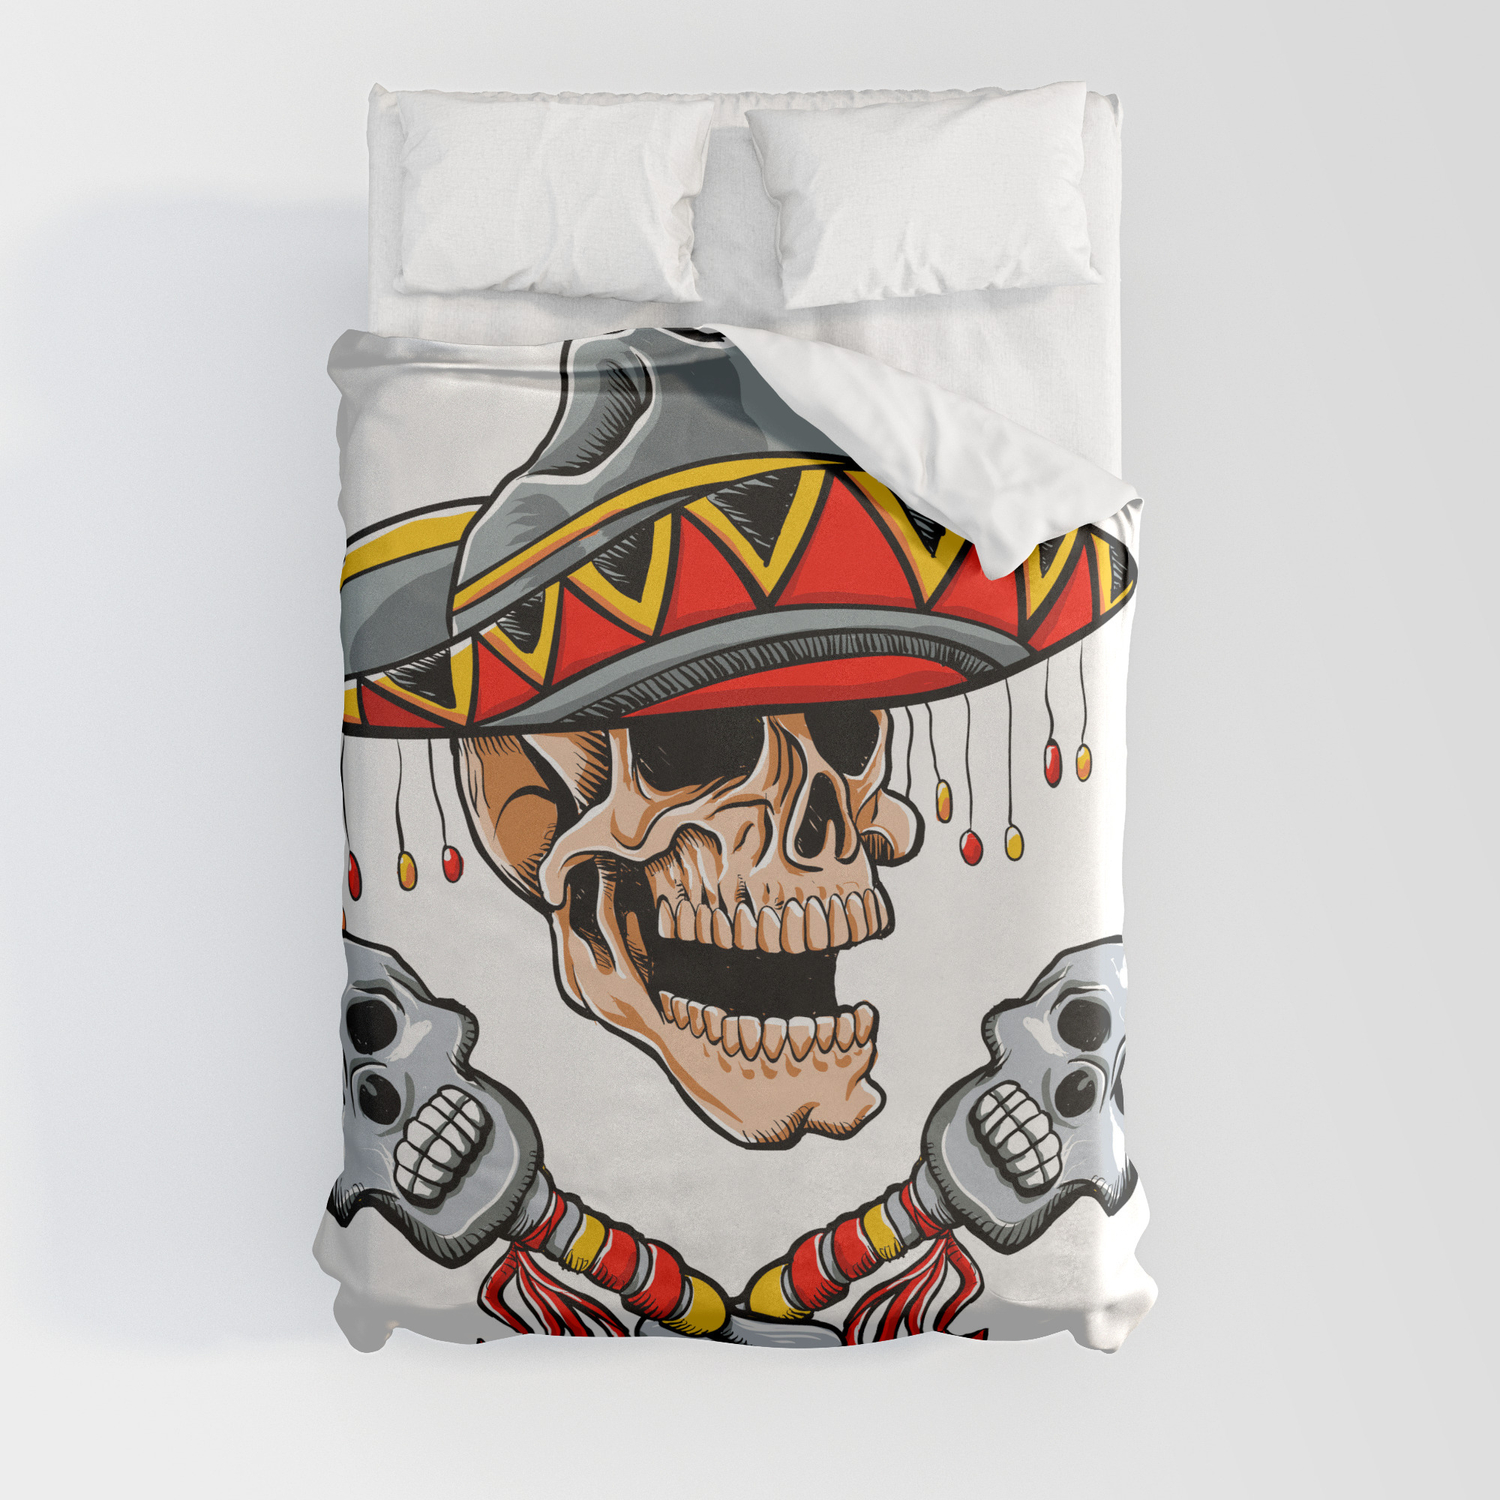 Sombrero And Maracas Duvet Cover, Mexican Style Duvet Covers